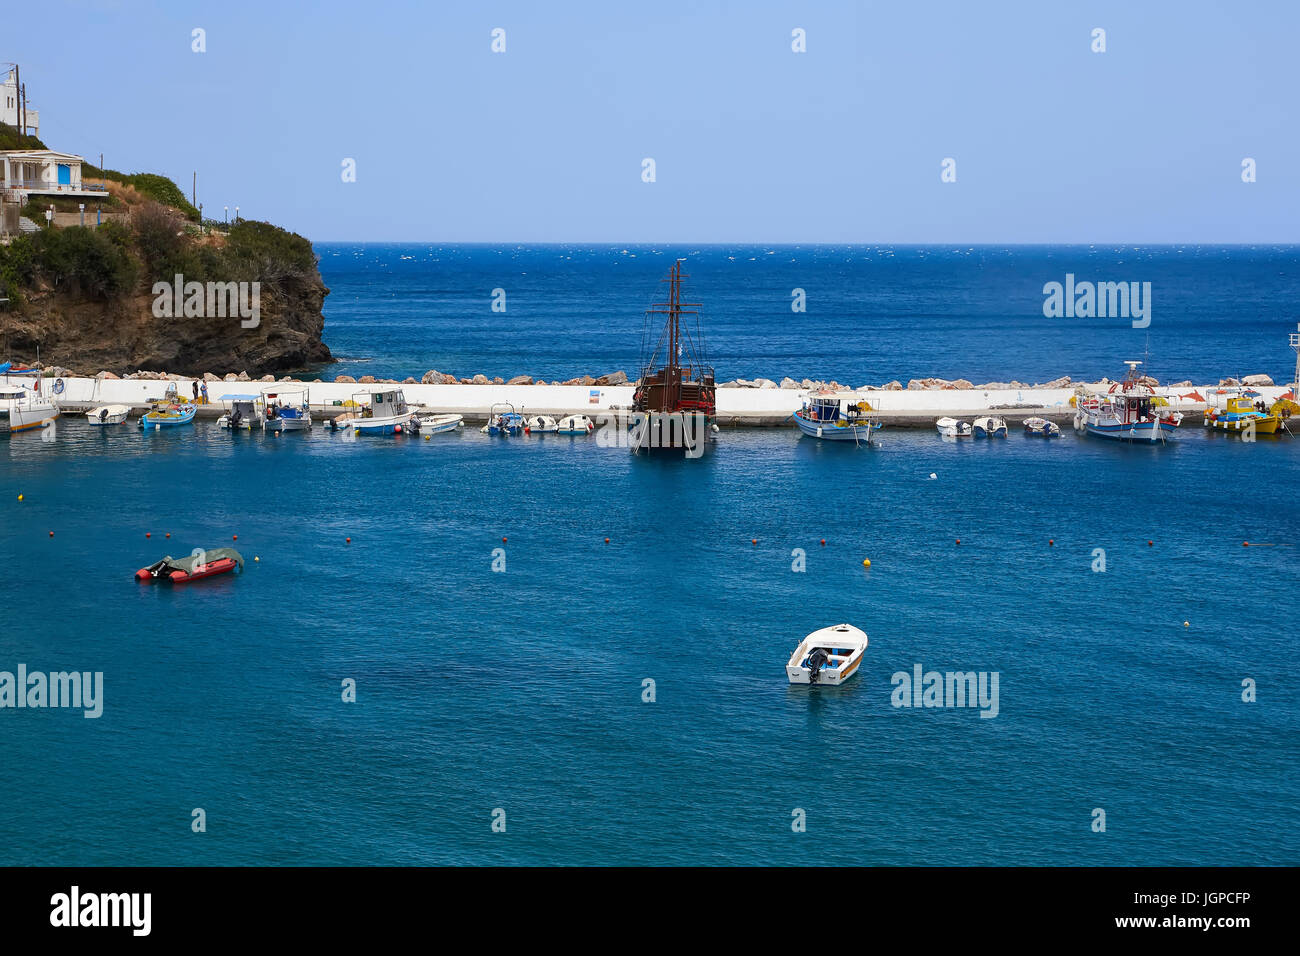 Boats and ships in the seaport of Bali at the Crete Island in Greece Stock Photo